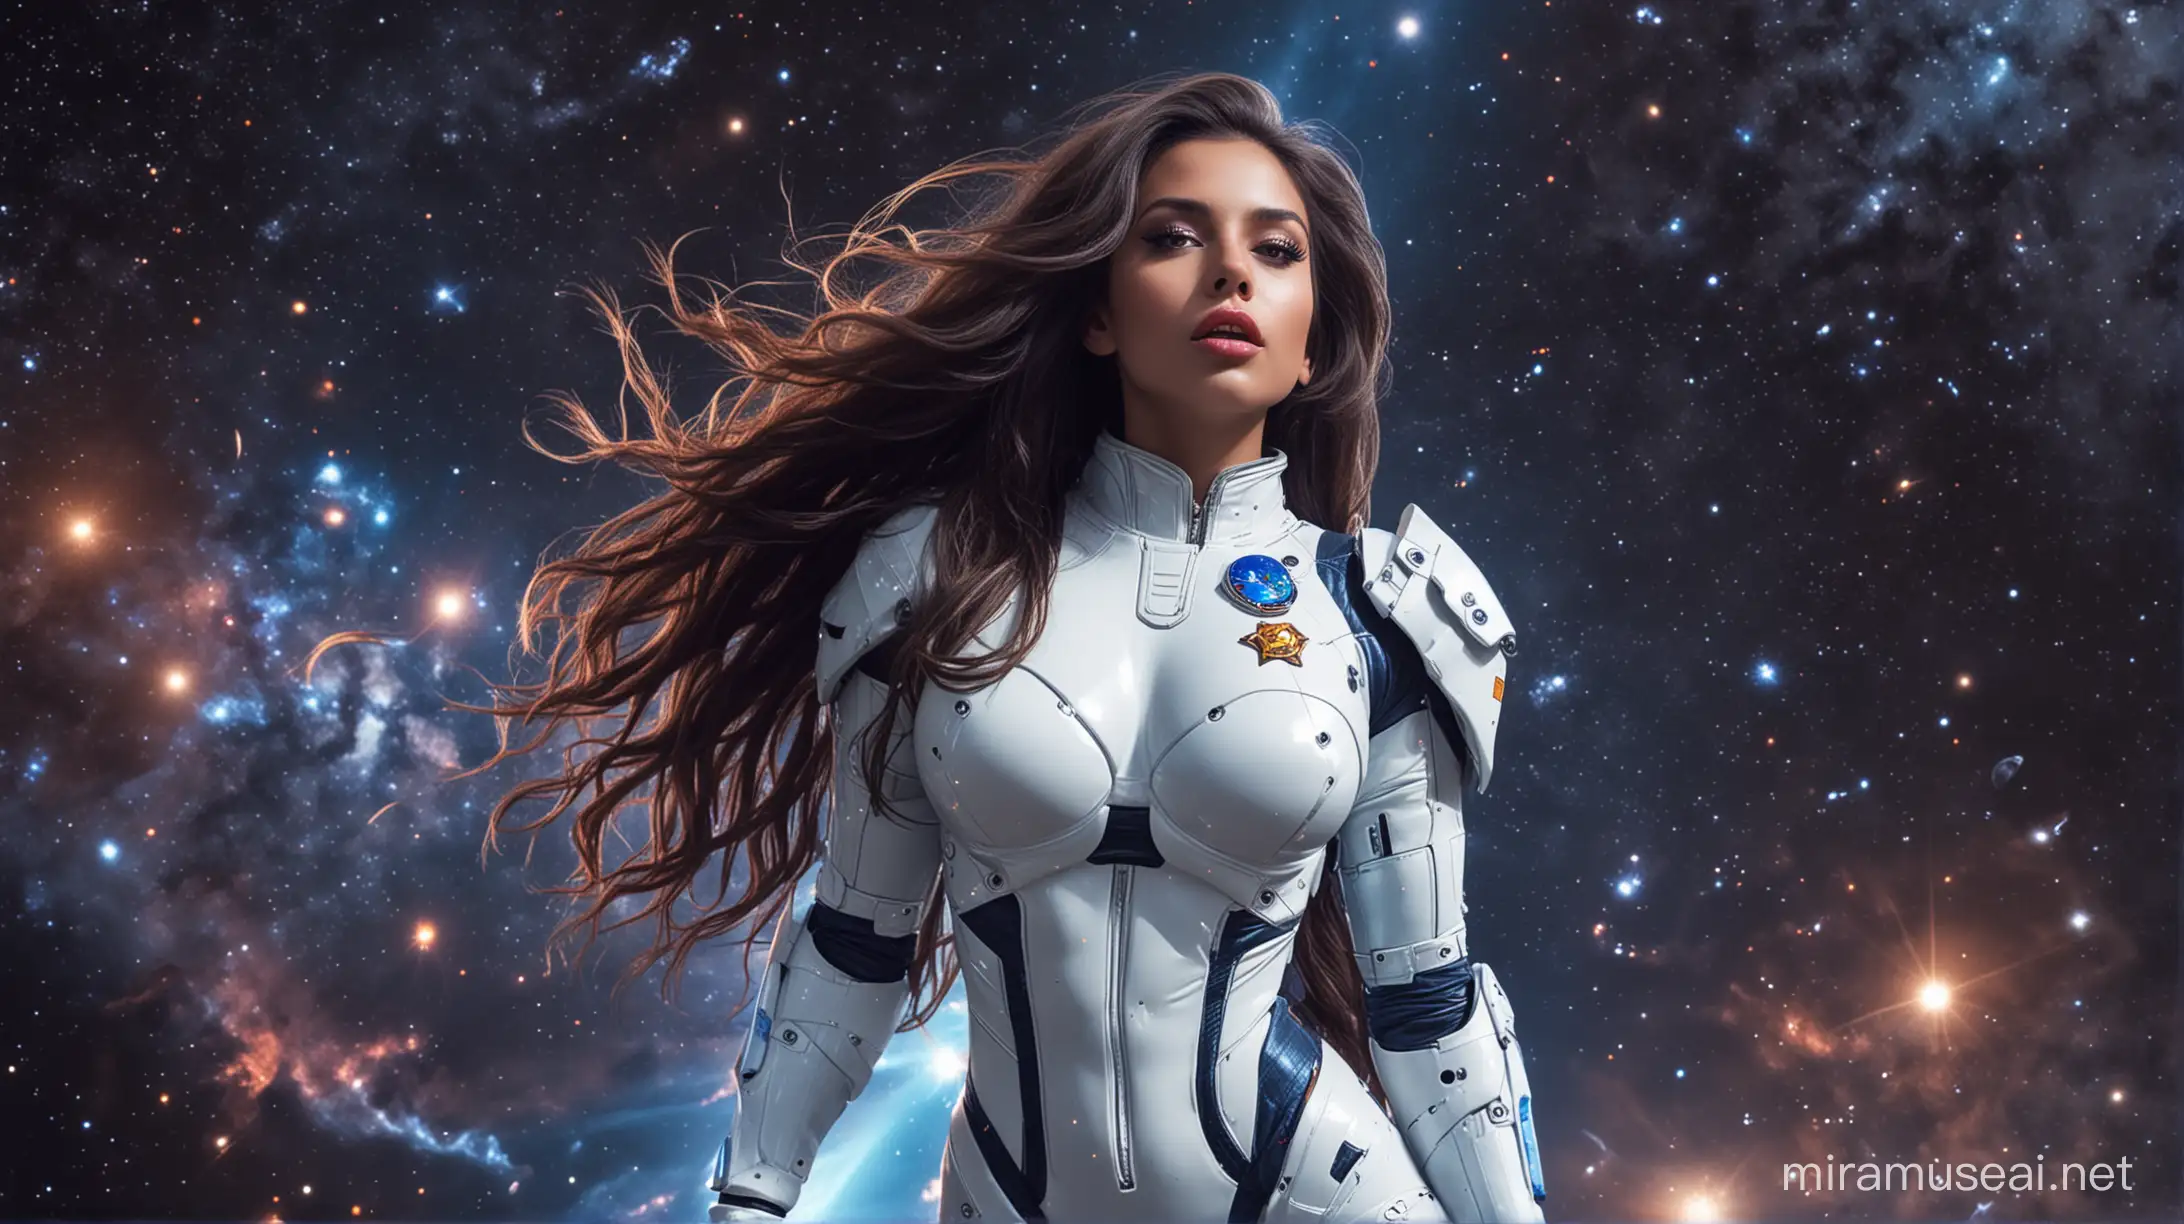 Sultry Latina Woman in Sleek Spacesuit Amidst Cosmic Chaos